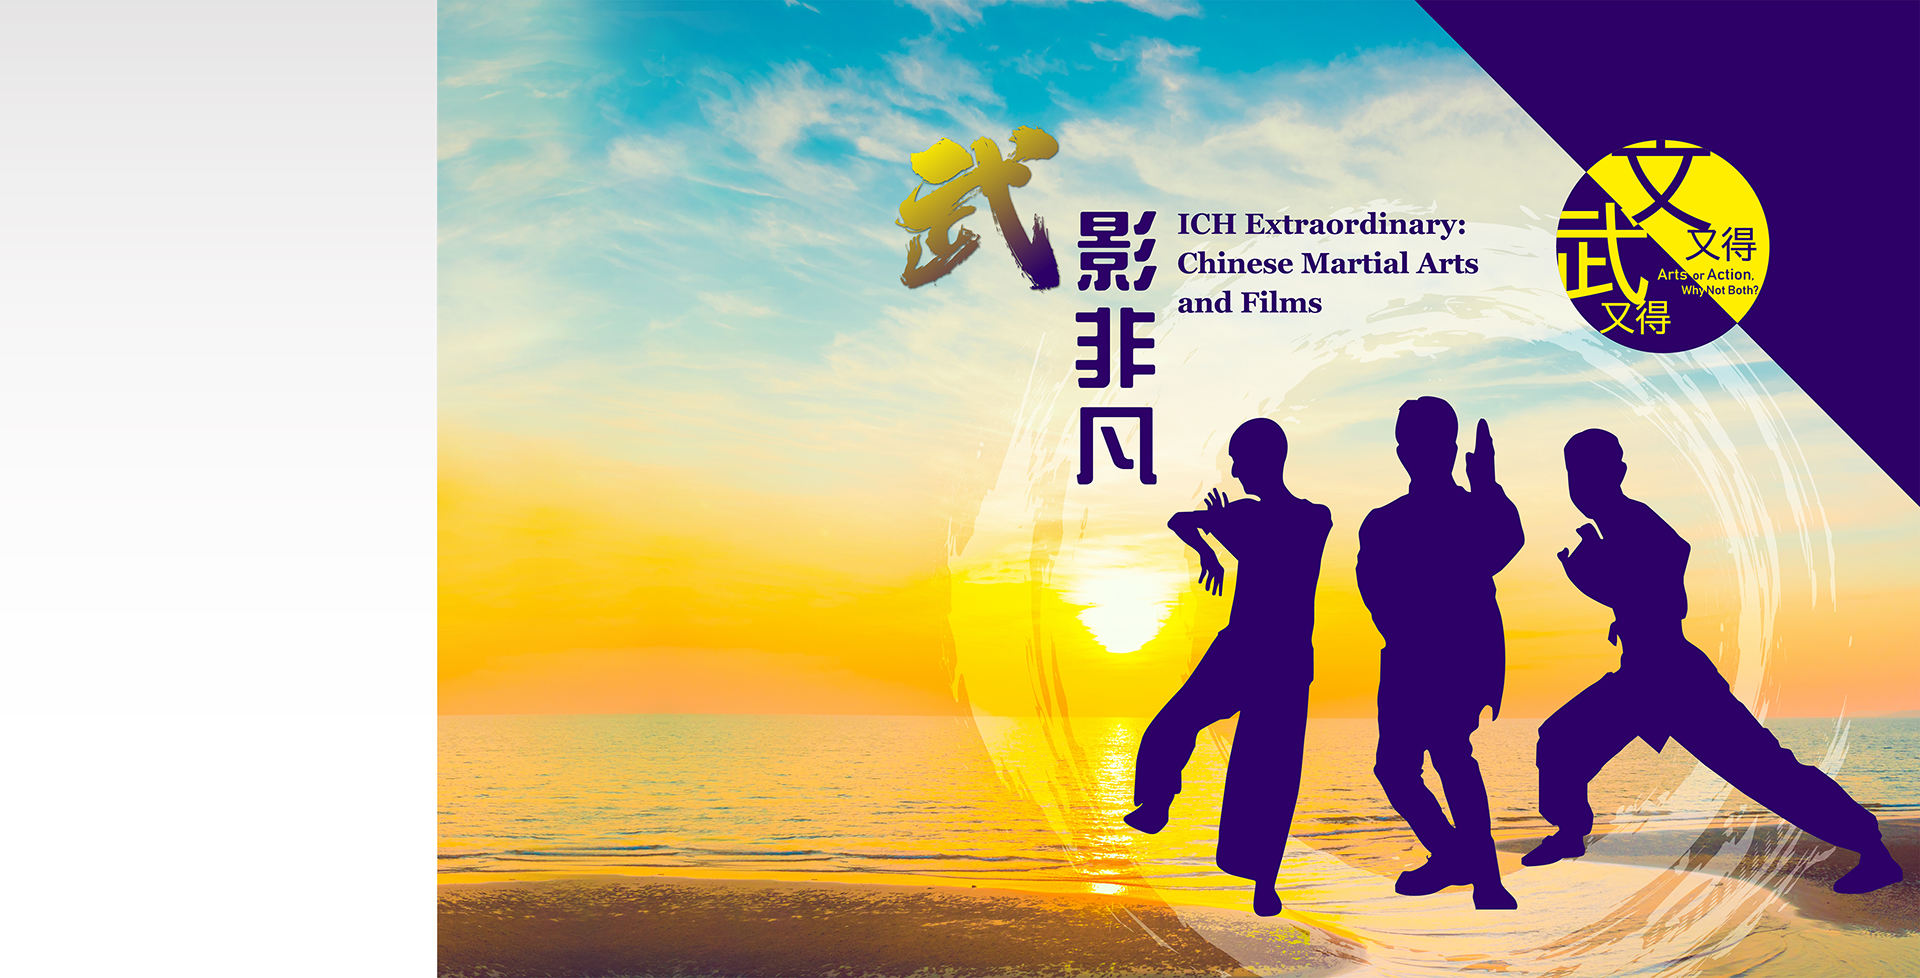 Arts or Action, Why Not Both? ICH Extraordinary: Chinese Martial Arts and Films